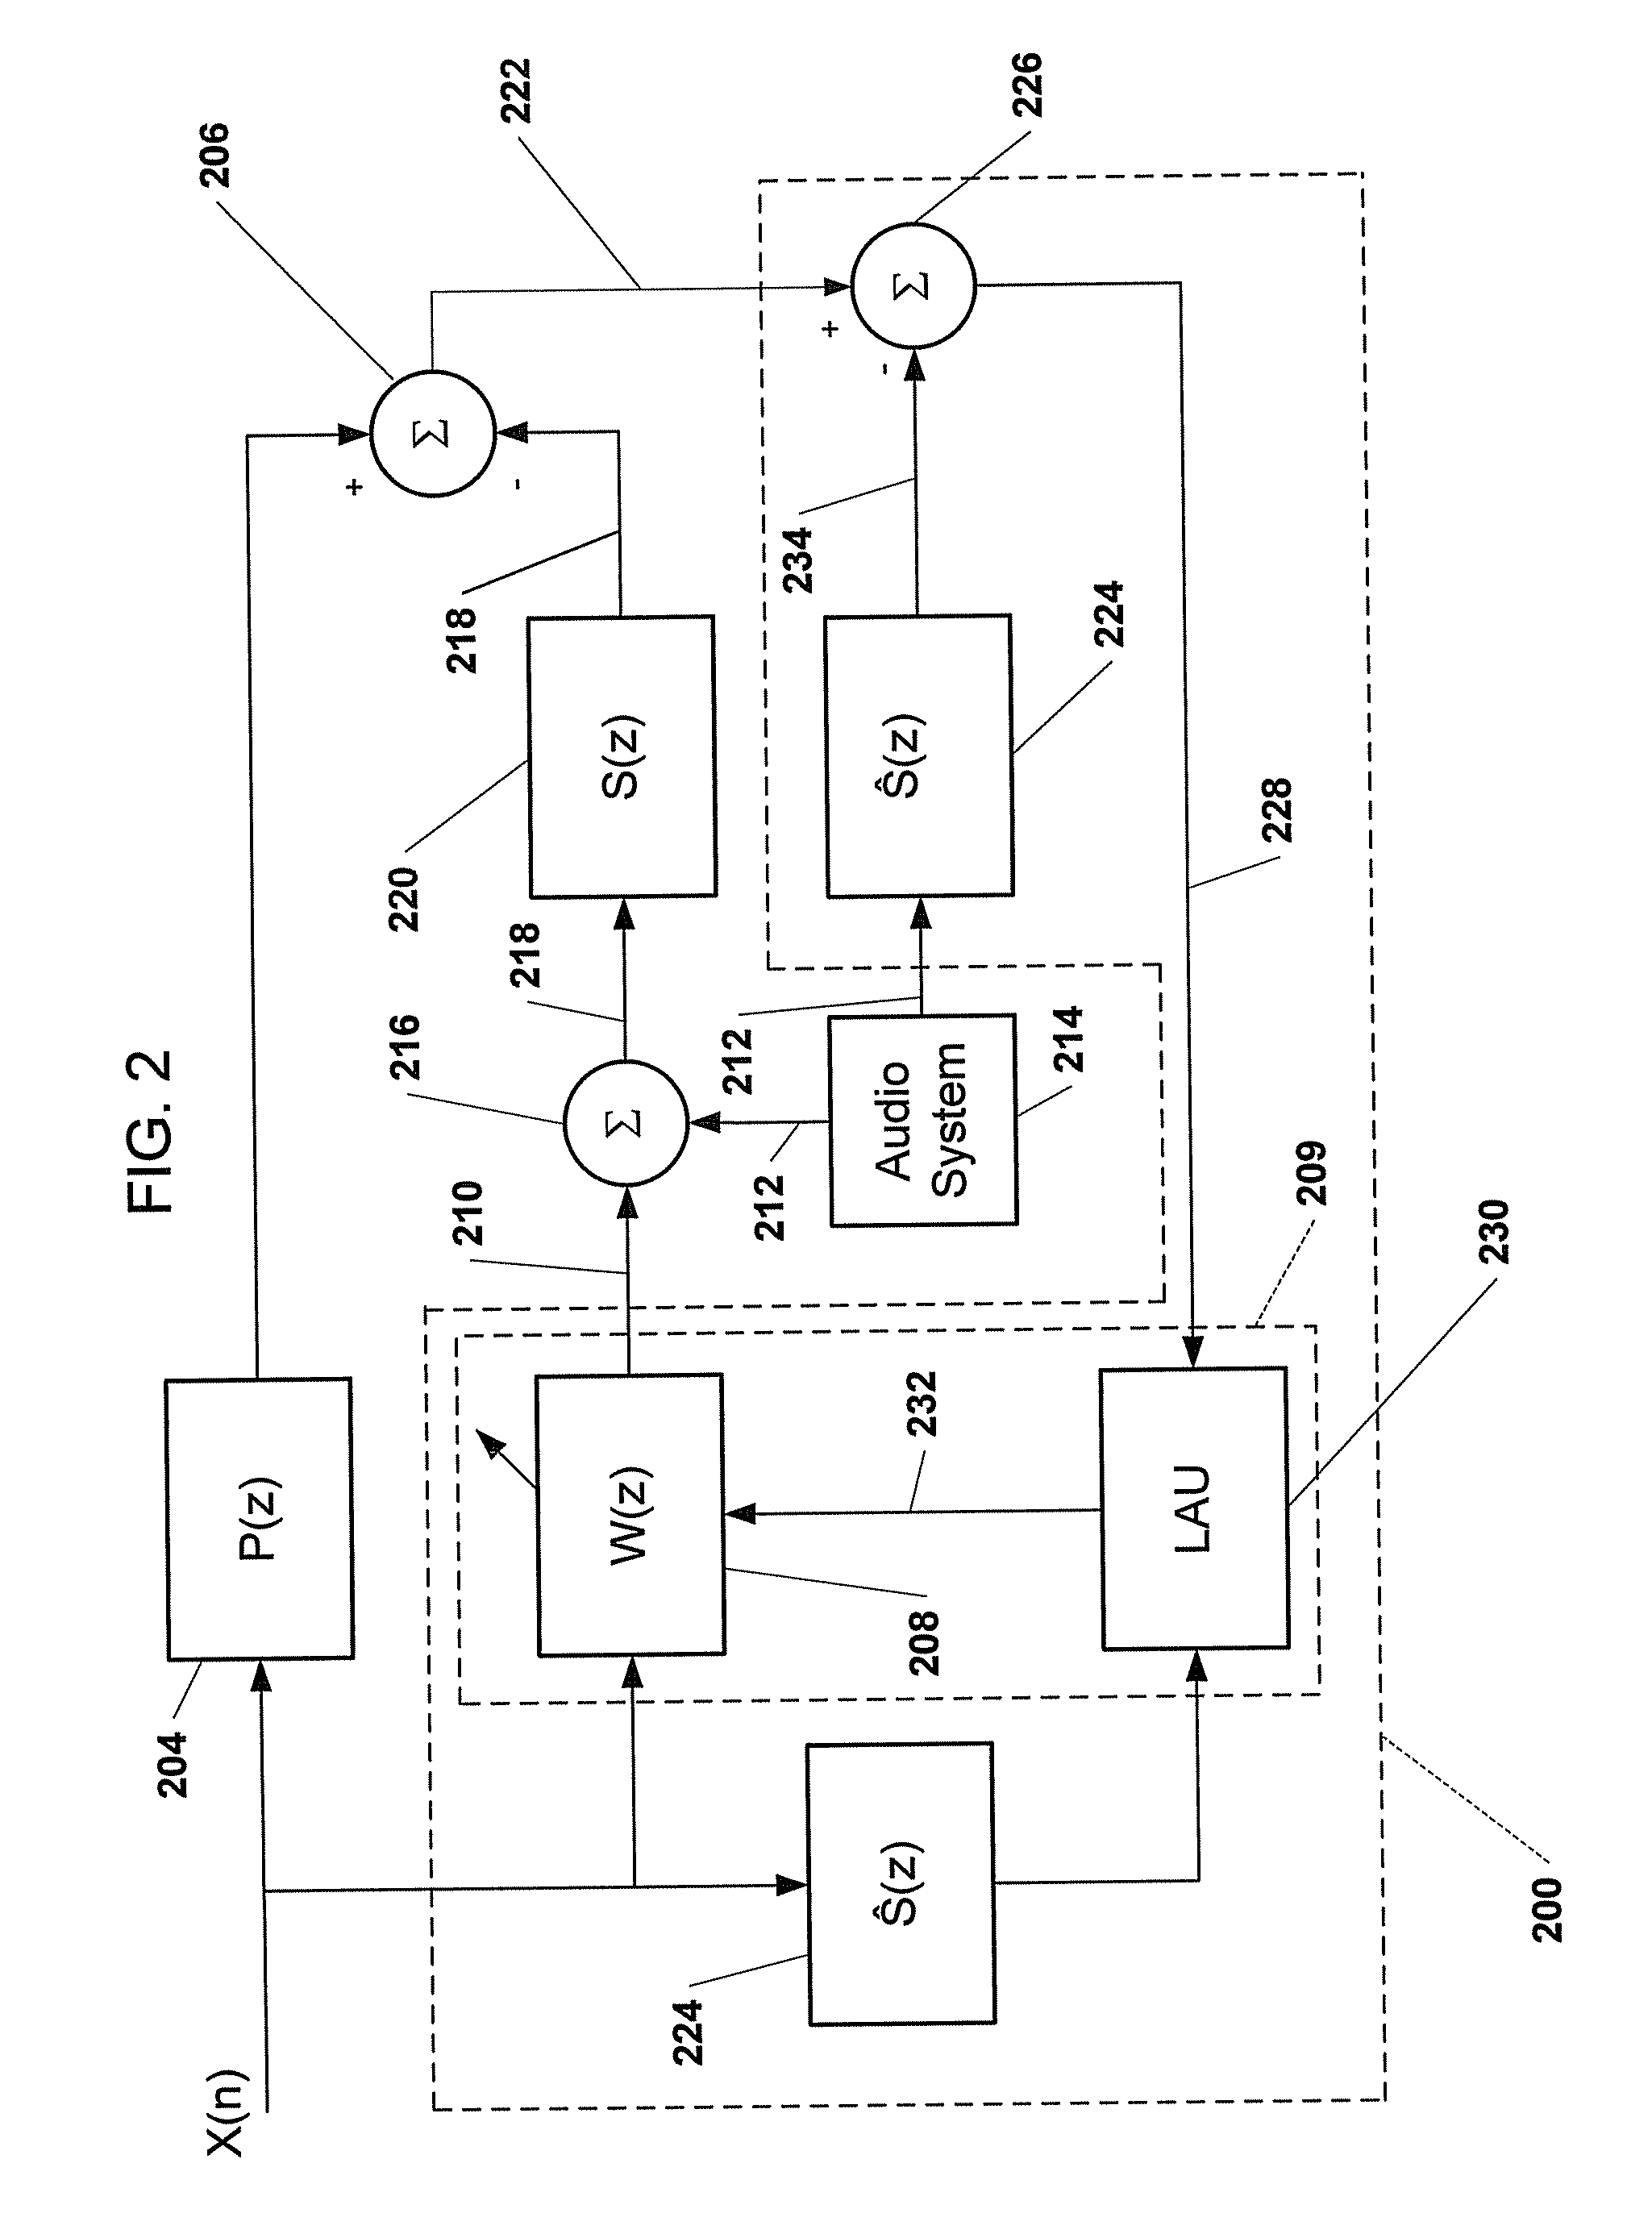 System for active noise control with audio signal compensation